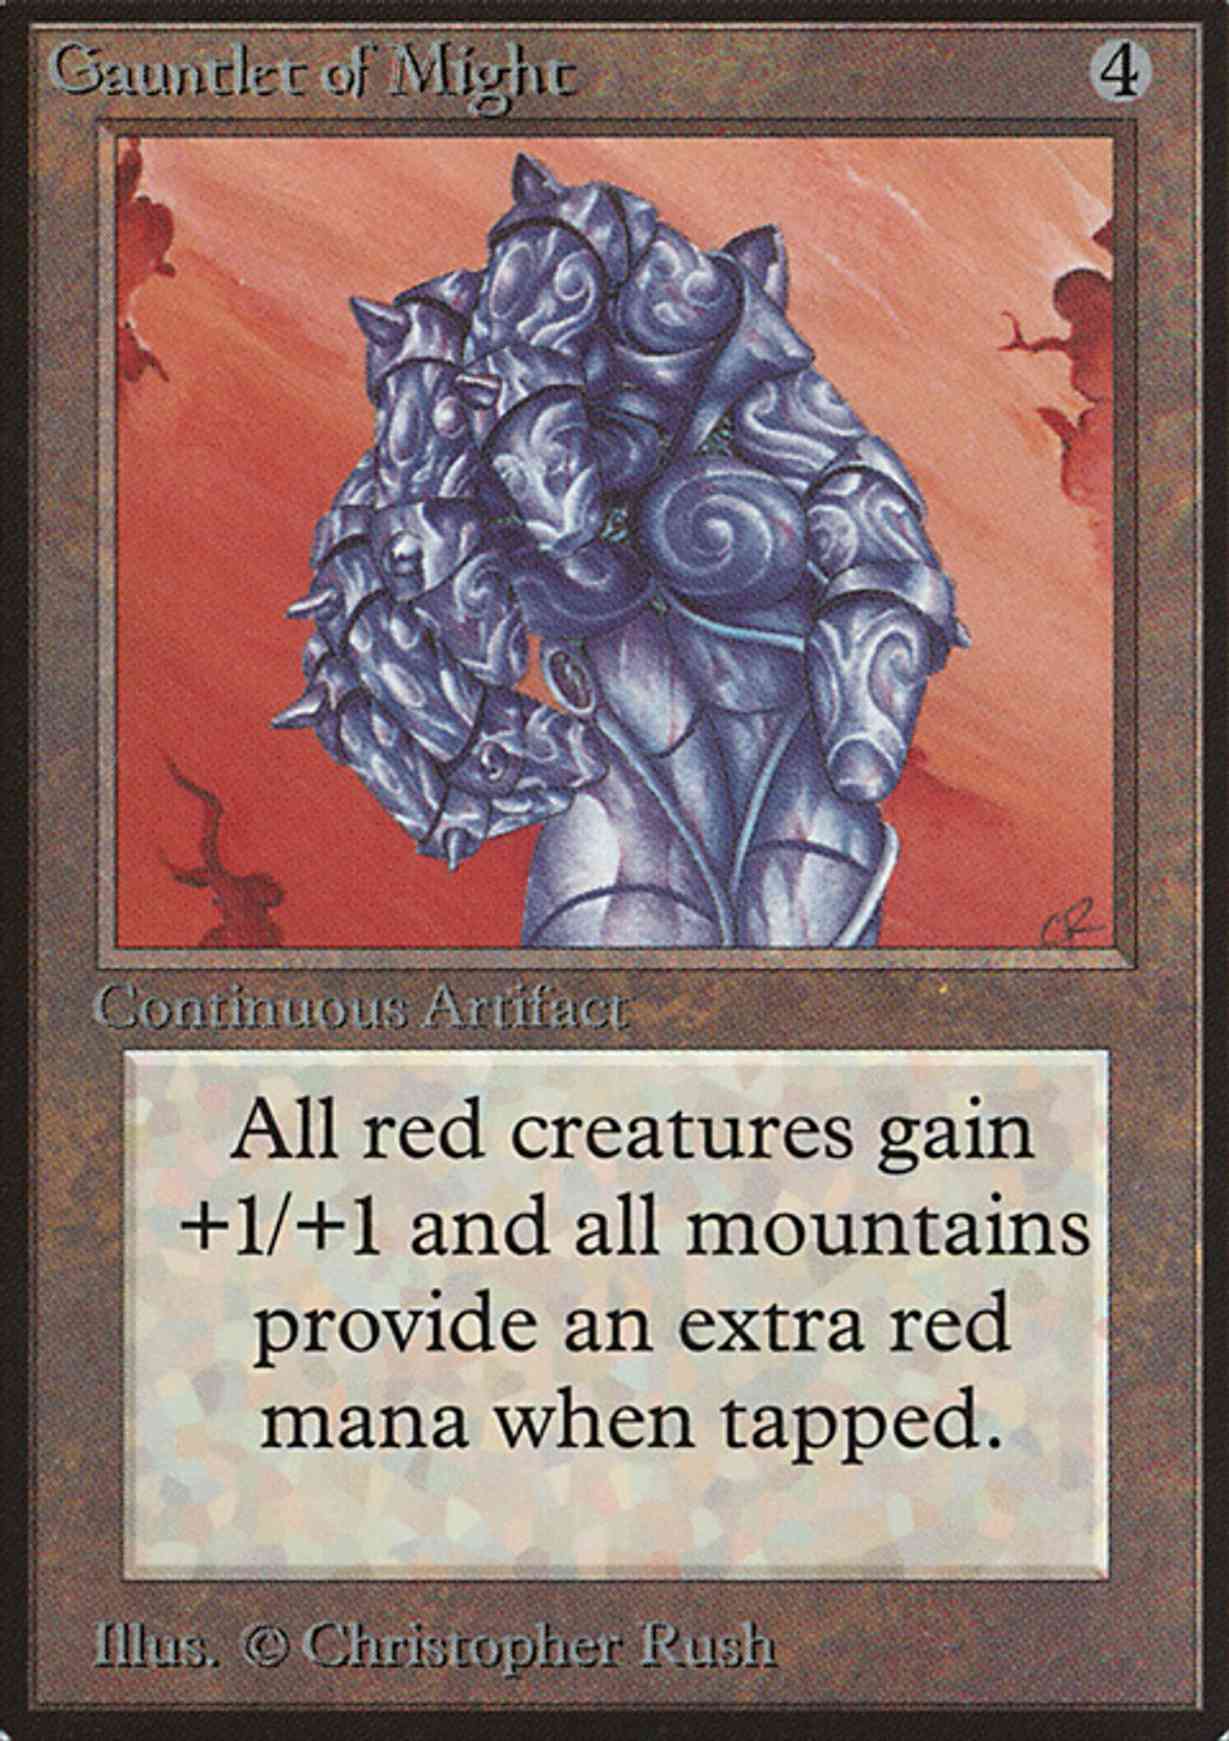 Gauntlet of Might magic card front